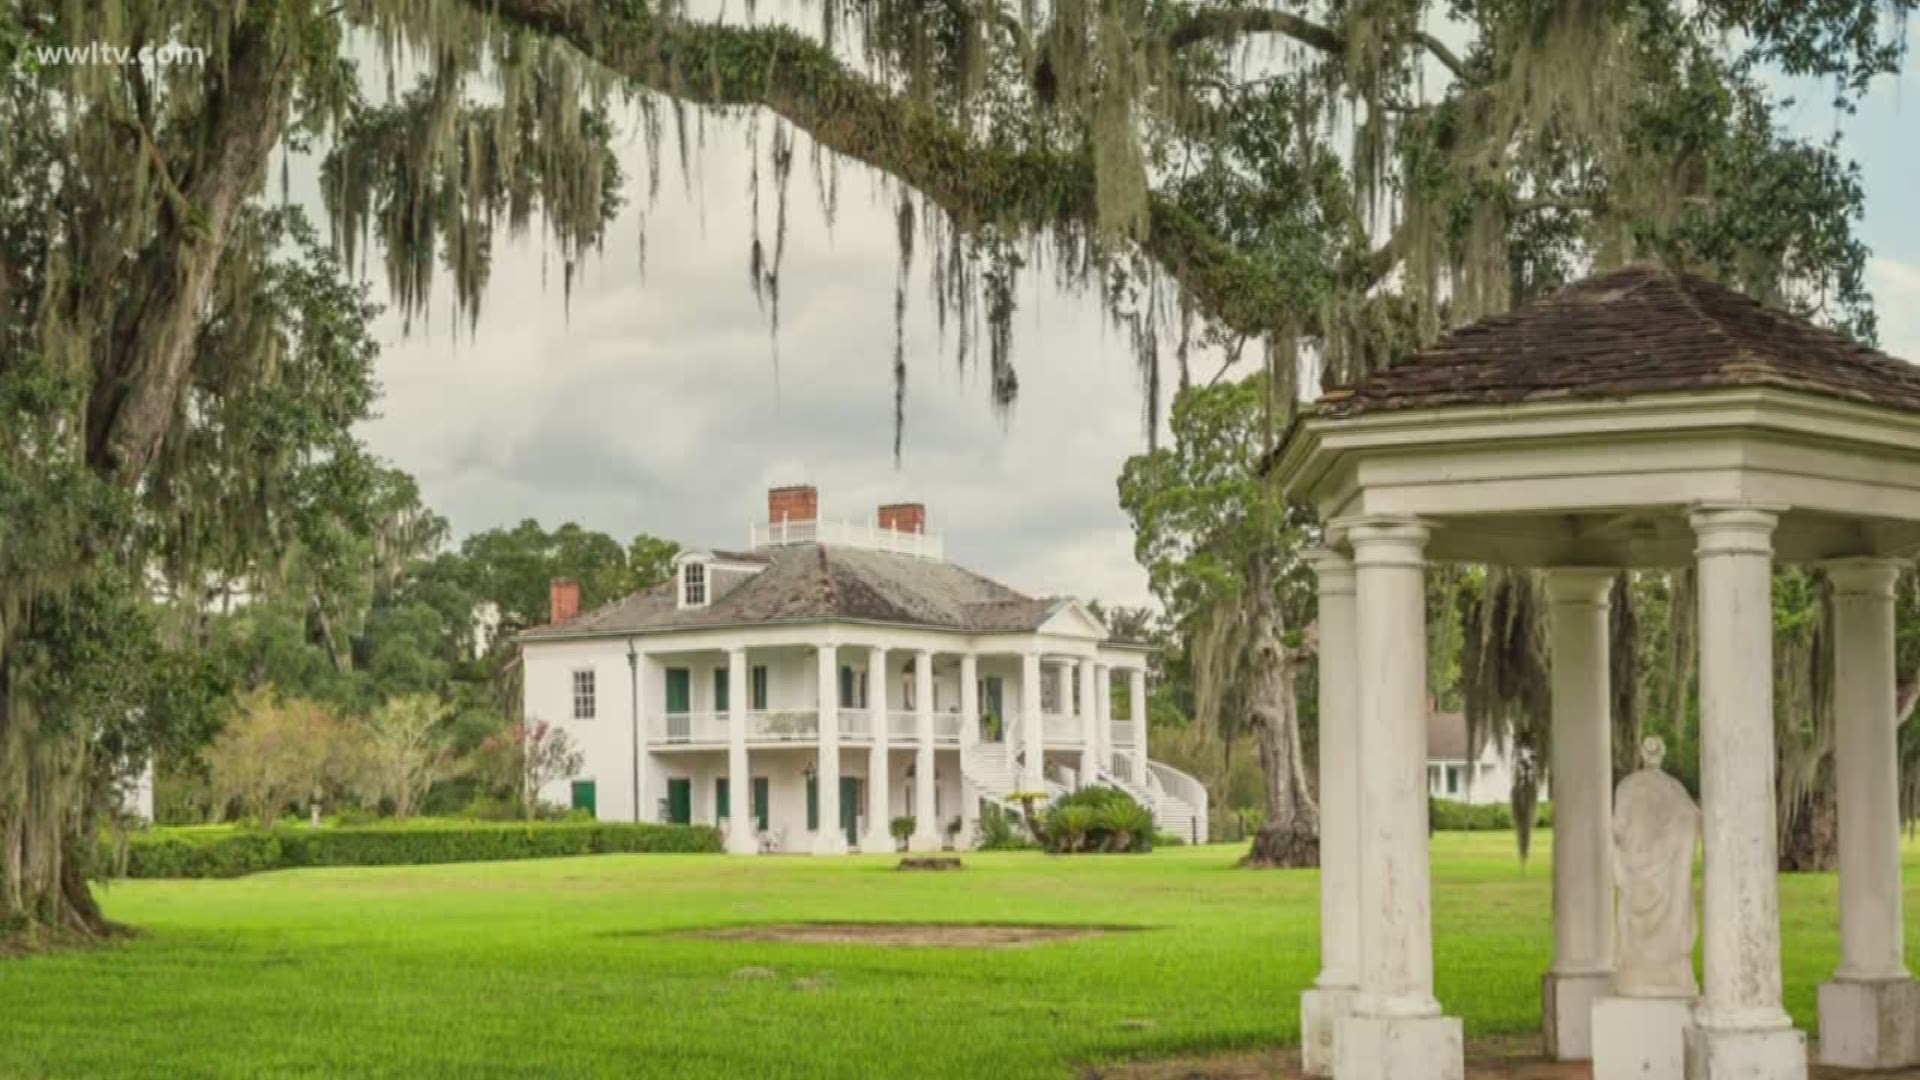 Evergreen Plantation located in Edgard, Louisiana has a new database for visitors to explore the deep history of the plantation and all who lived there.